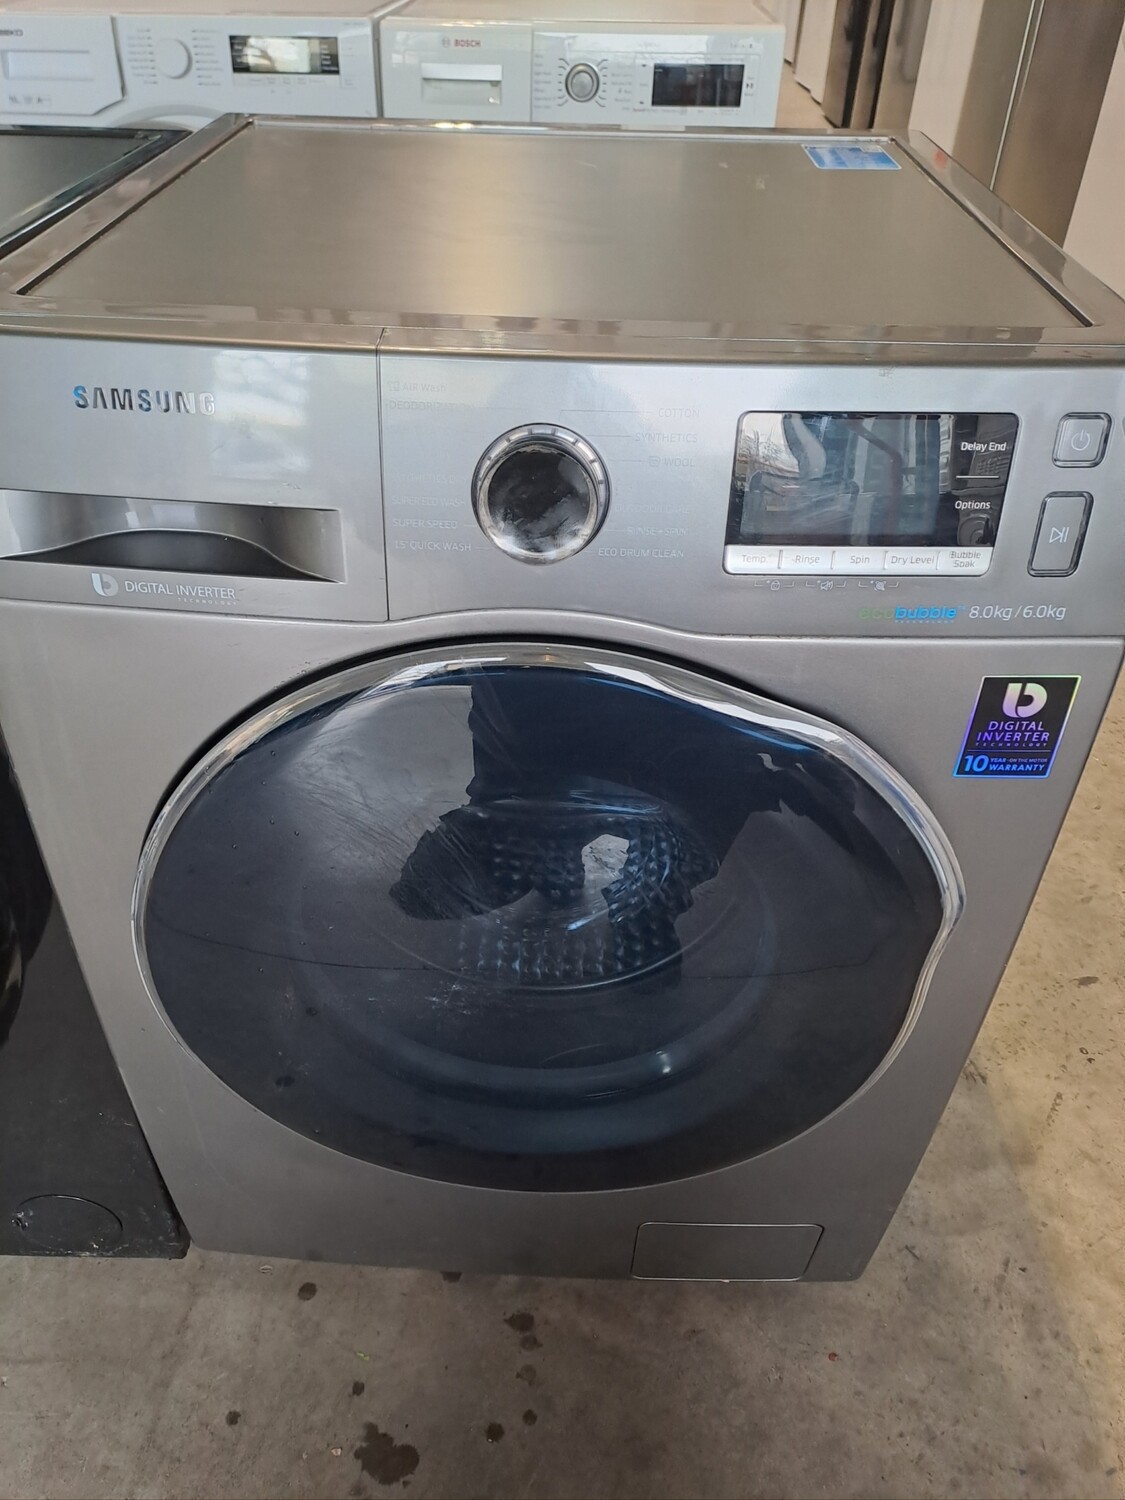 Samsung WD80J6410AX/EU 8+6kg Load 1400 Spin Washer Dryer - Graphite Grey- Refurbished - 6 Month Guarantee. This item is located in our Whitby Road Shop